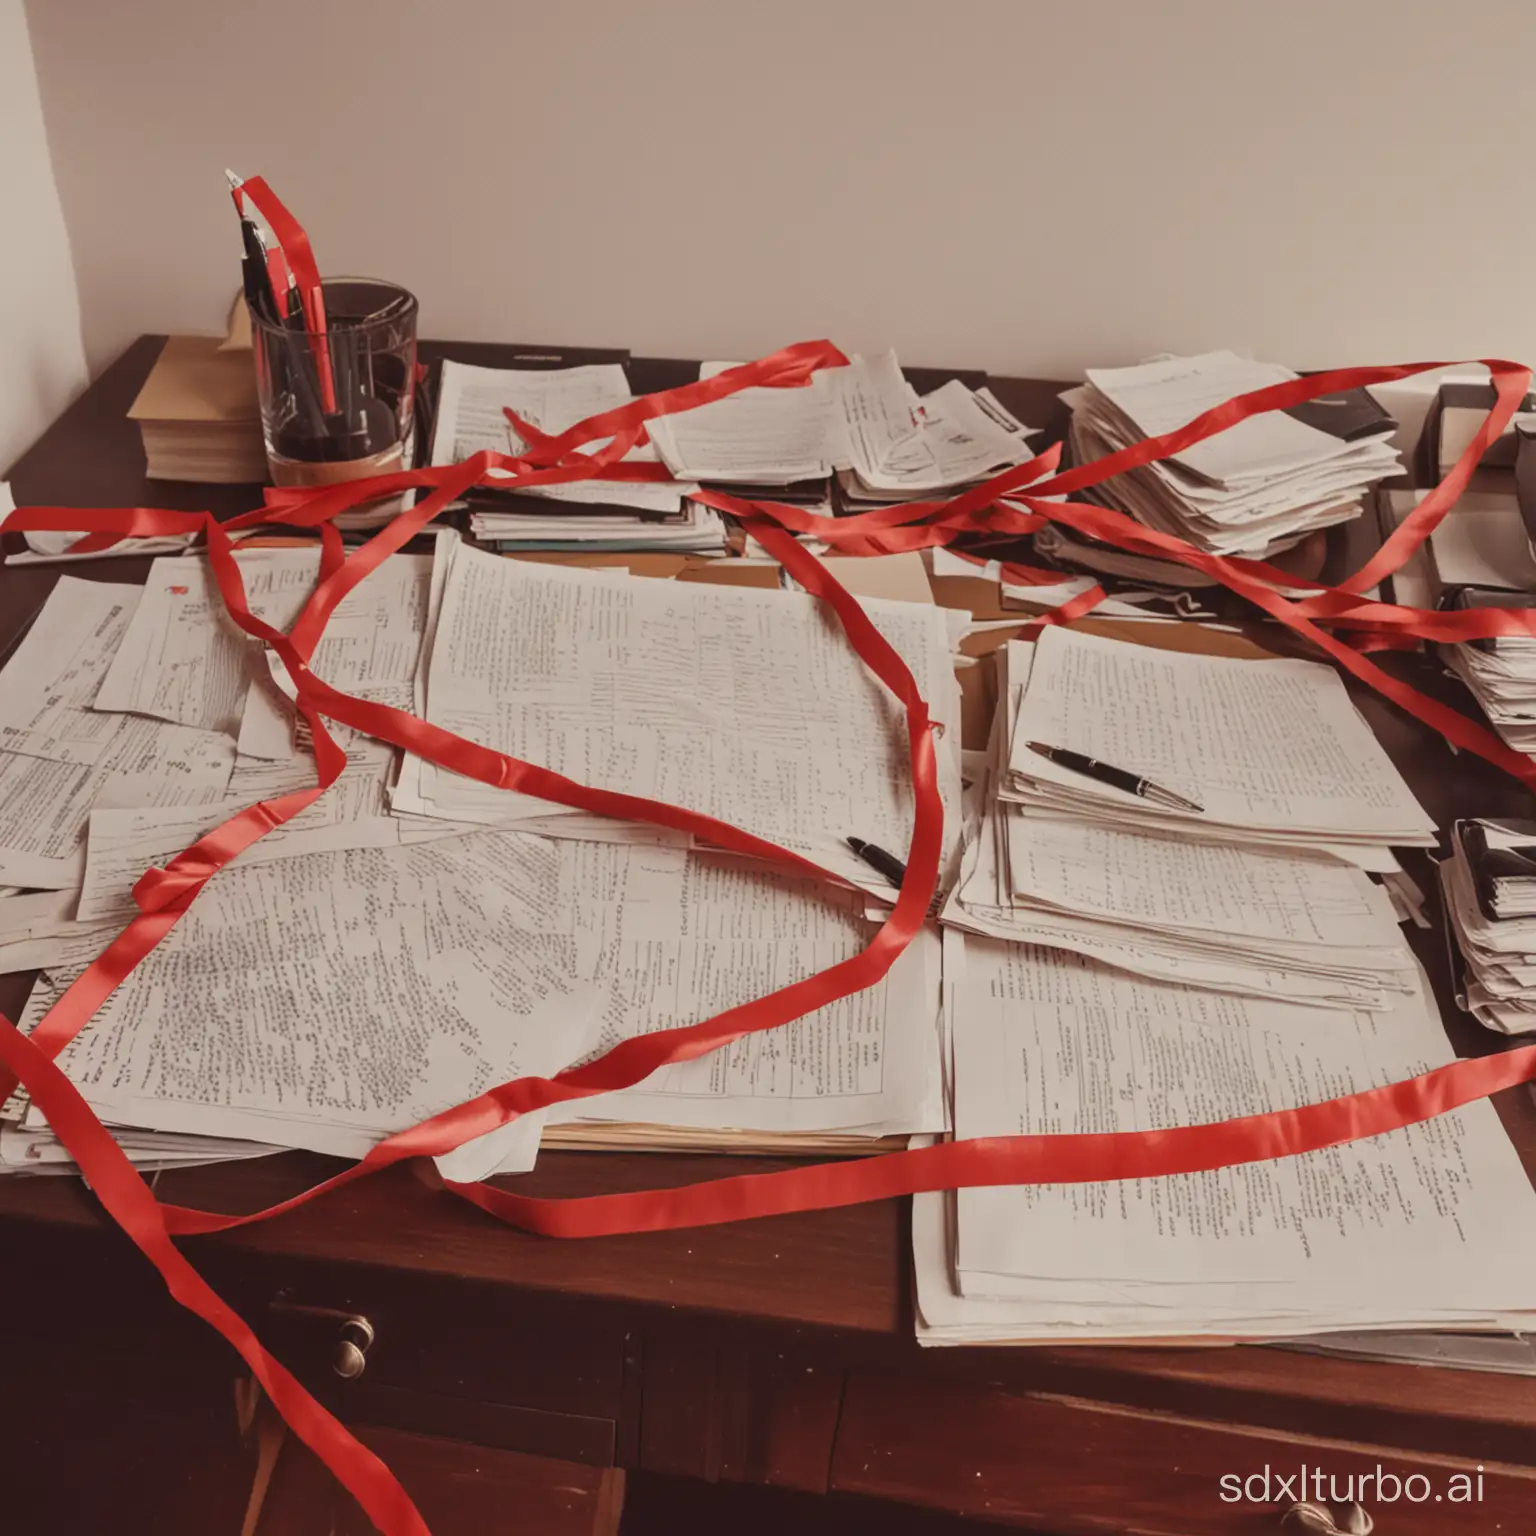 Busy-Desk-Covered-in-Red-Tape-Overwhelmed-Office-Chaos